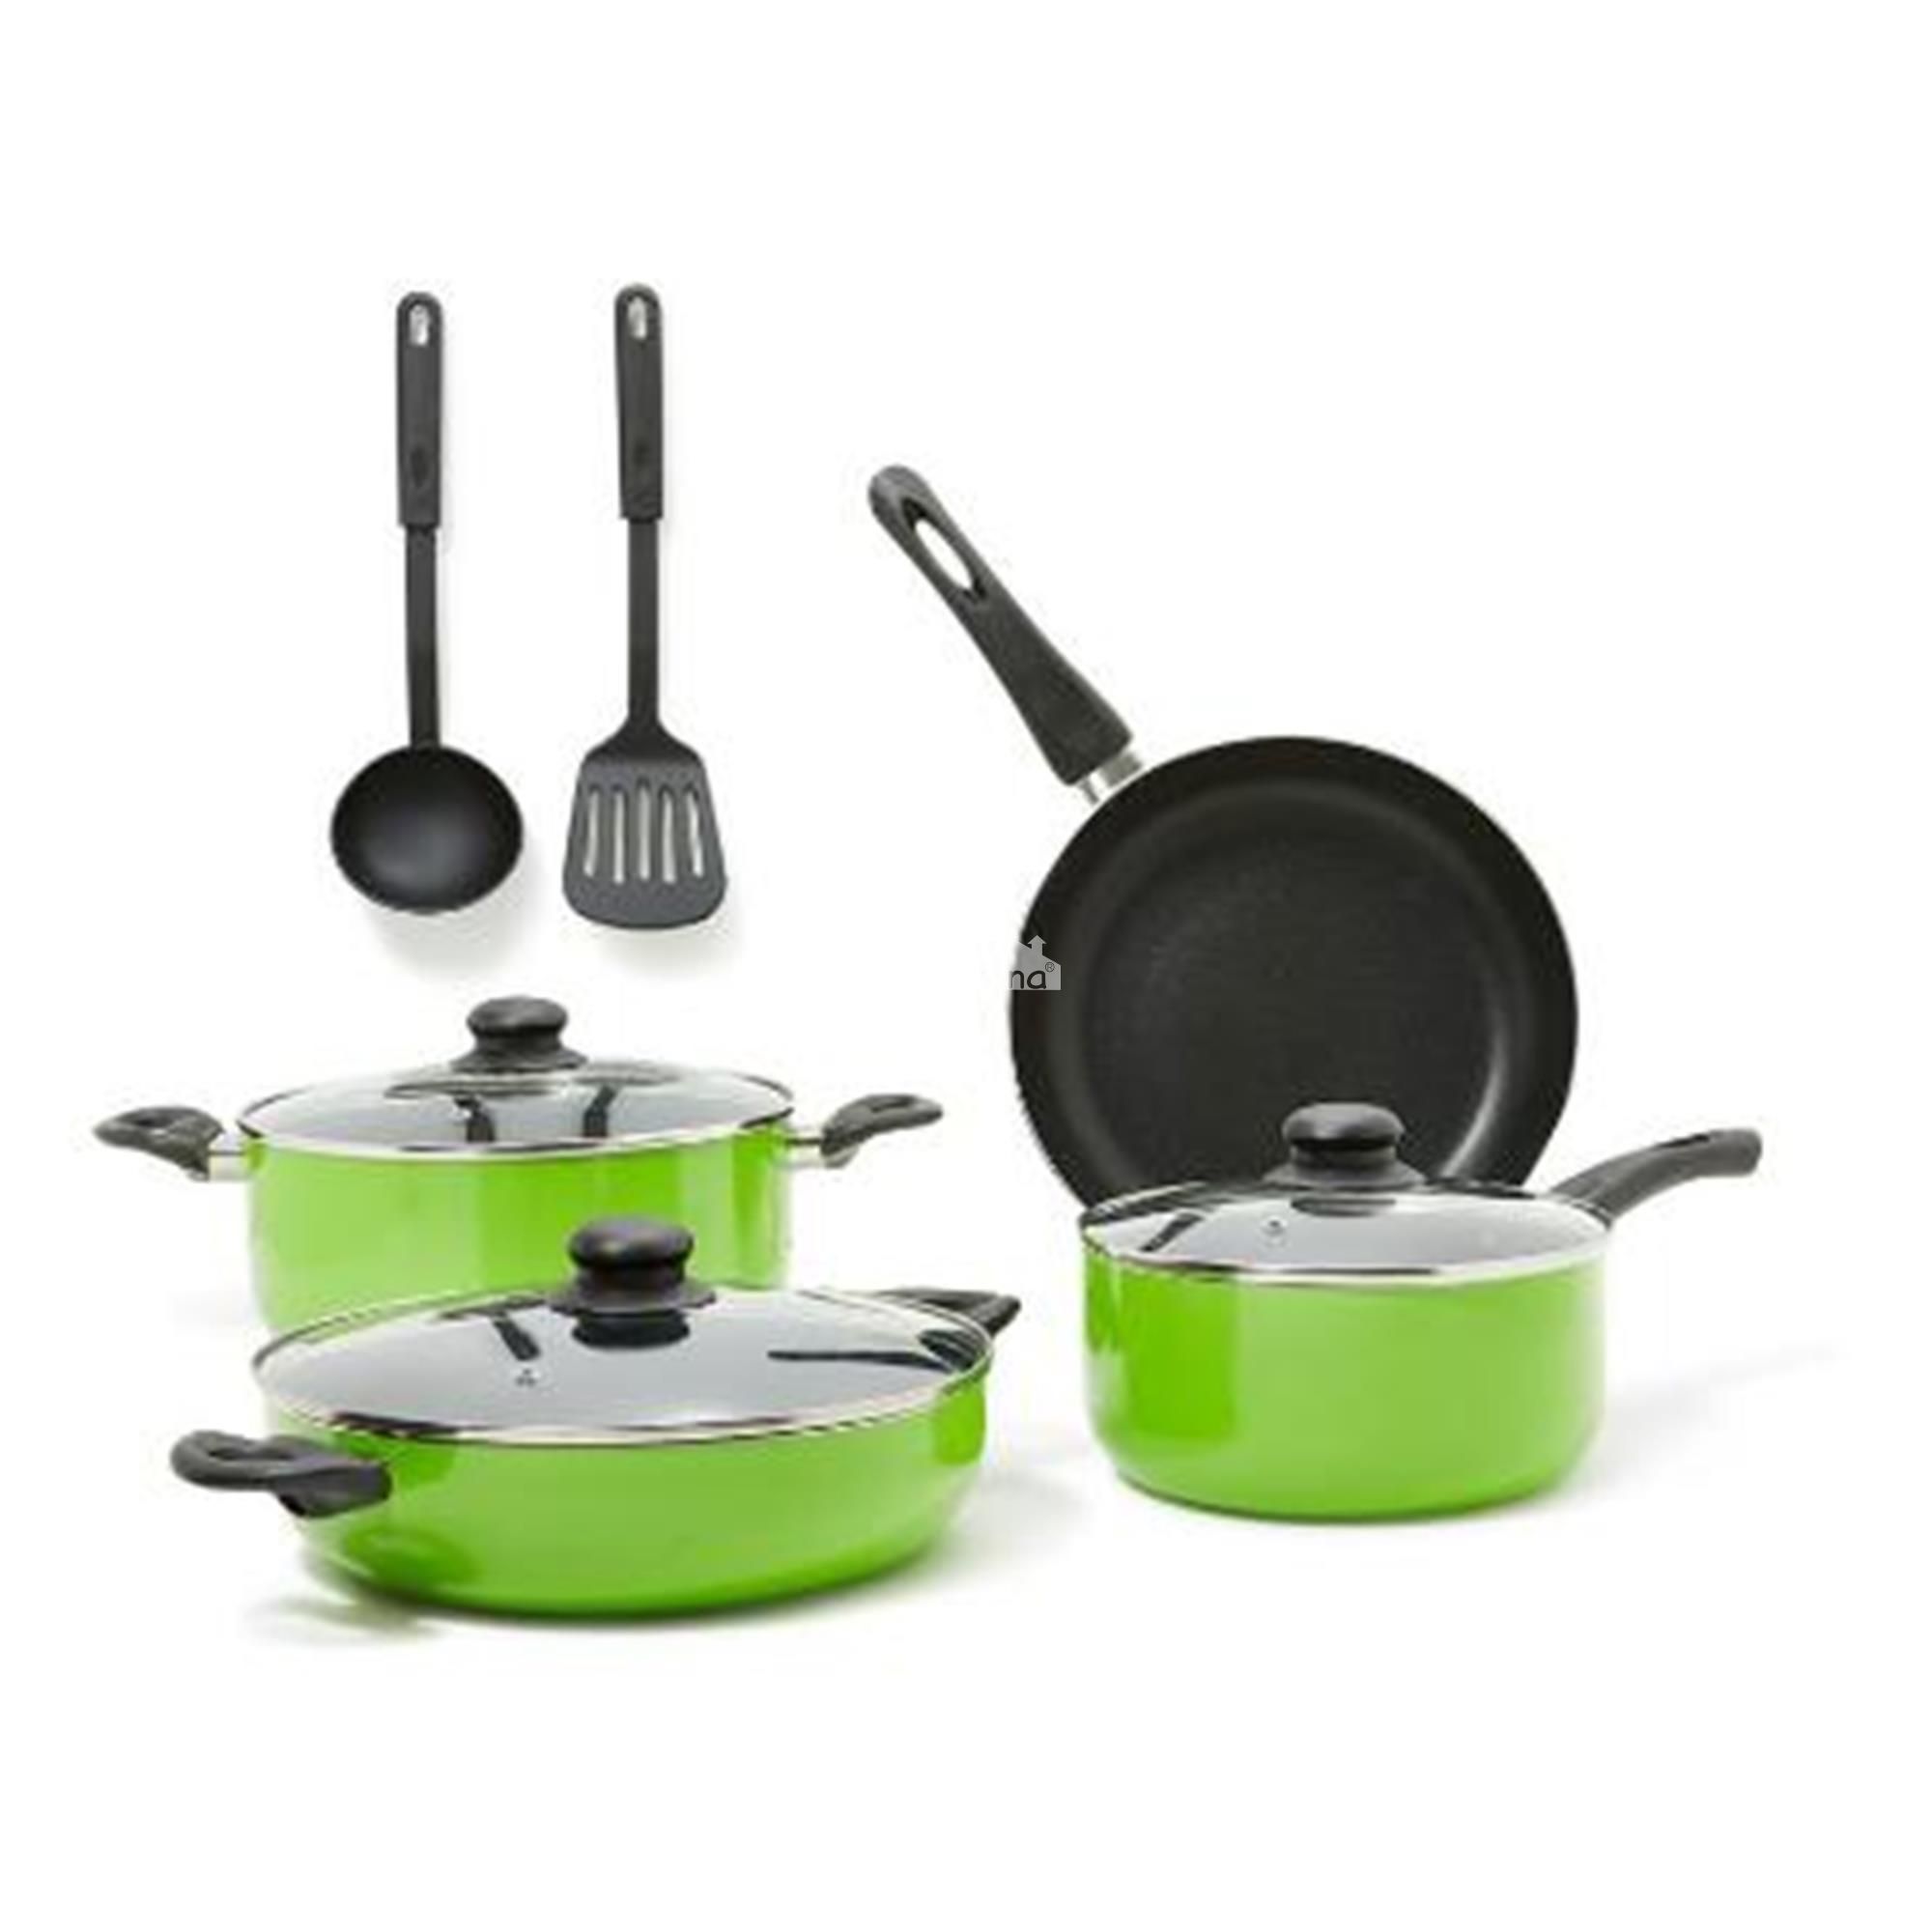 Green cookware AMAL Classic aluminum induction cookware sets